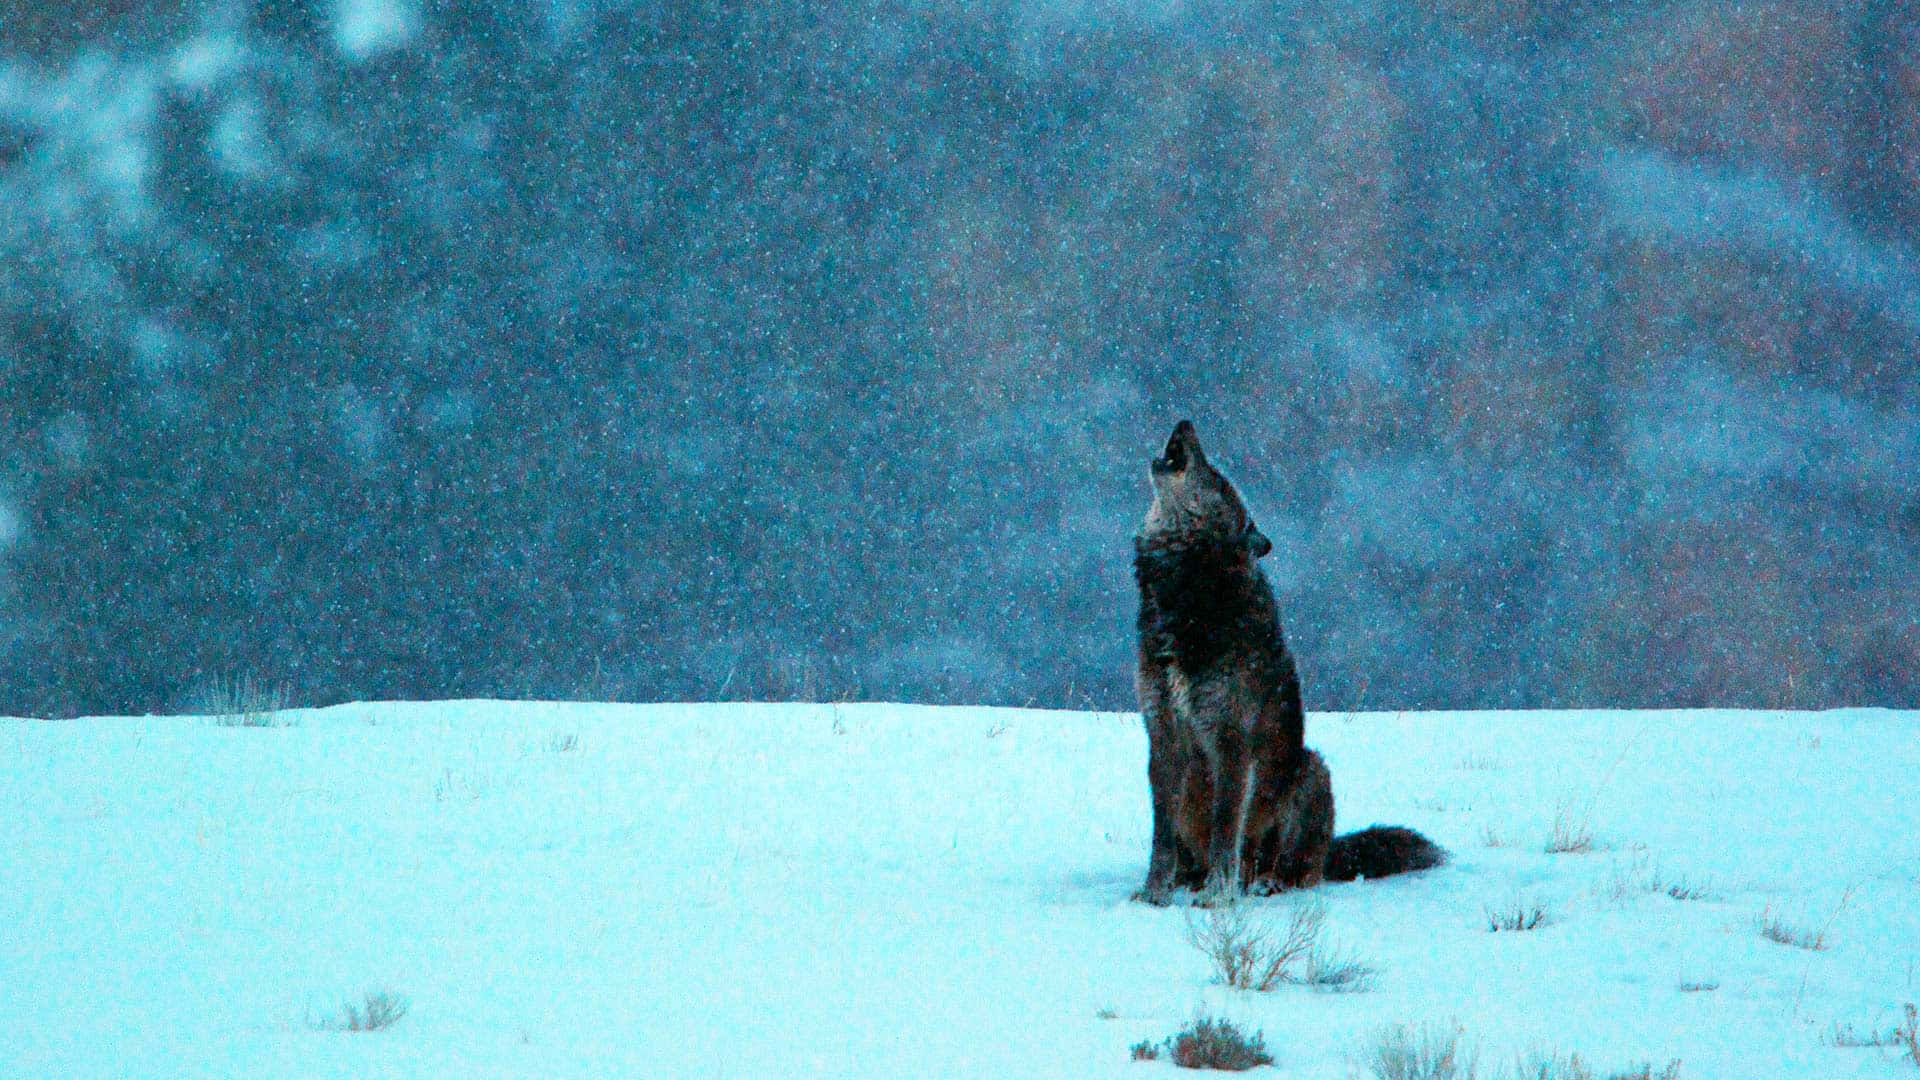 A Dark and Eerie Howling Wolf Gazing Into the Night